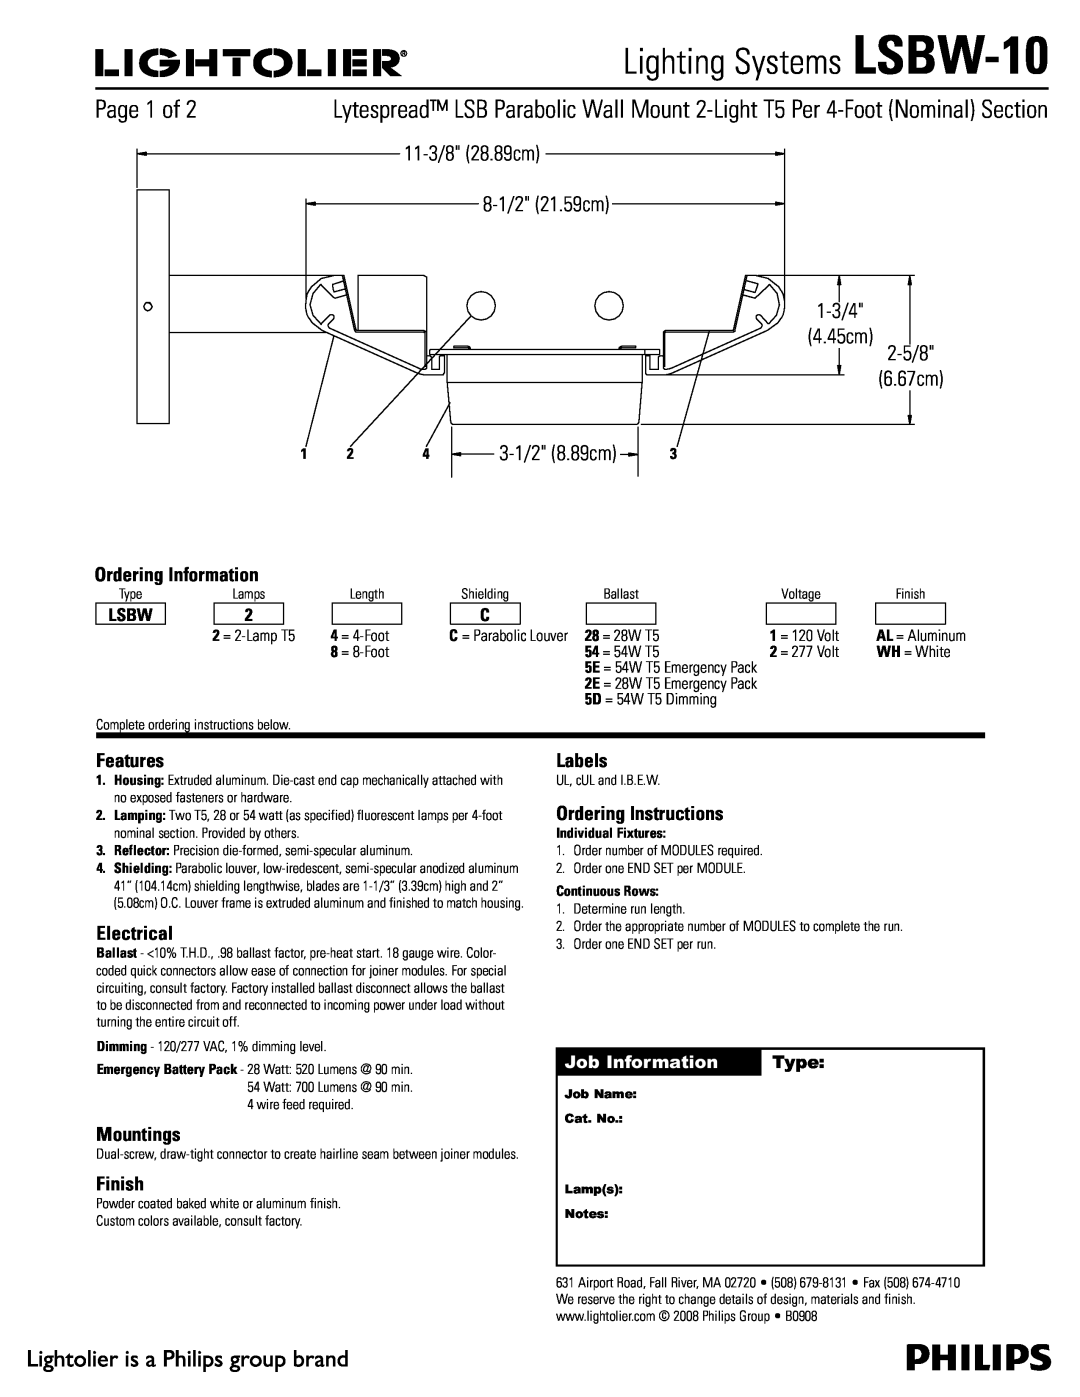 Lightolier LSBW-10 manual Ordering Information, Features, Electrical, Mountings, Finish, Labels, Ordering Instructions 